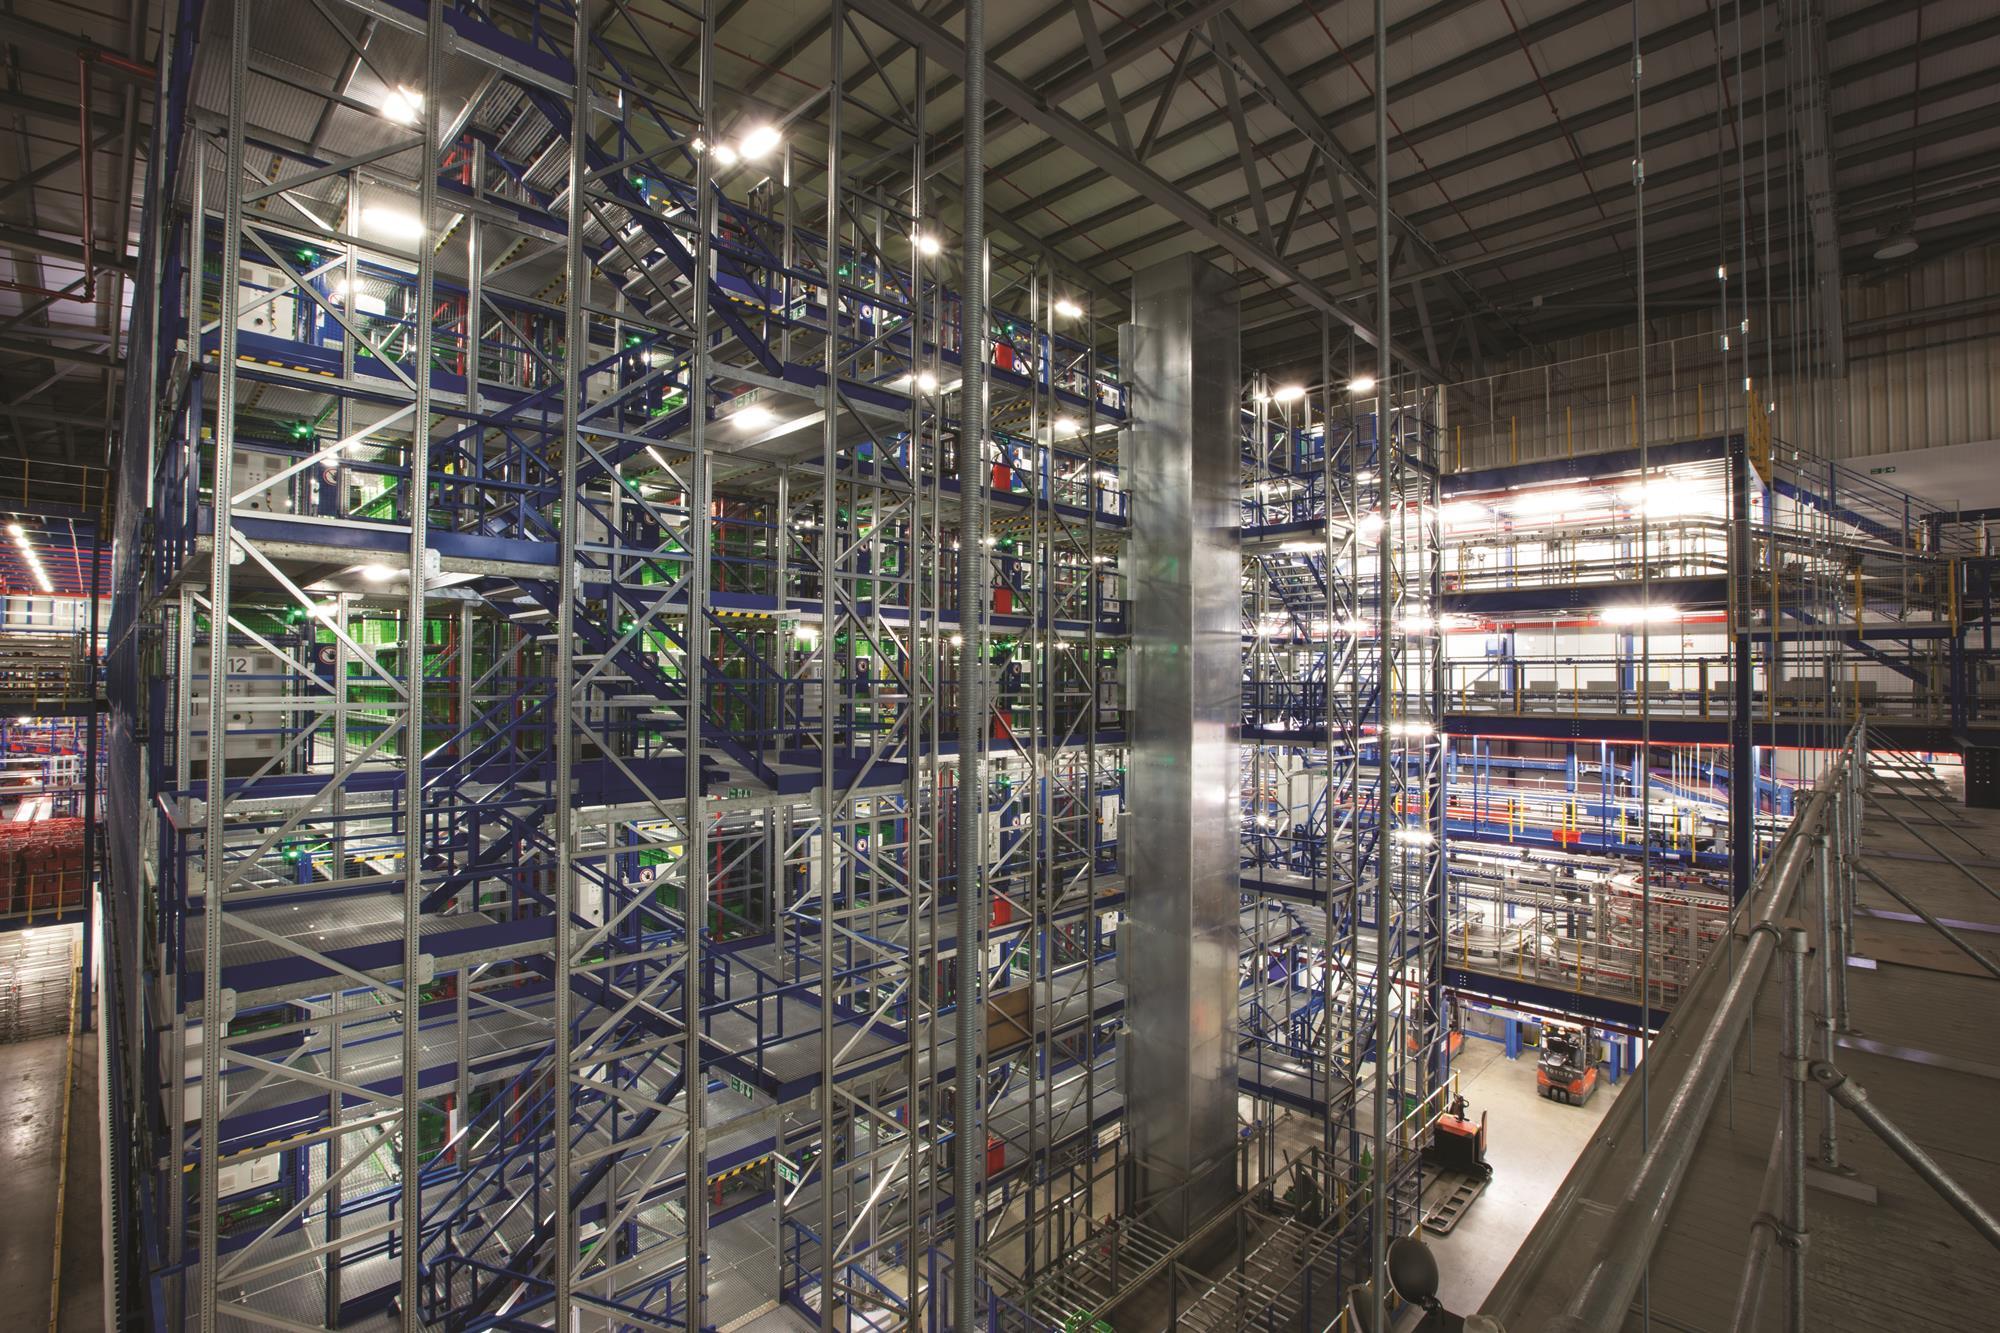 ocado-installs-4g-technology-in-automated-warehouses-to-drive